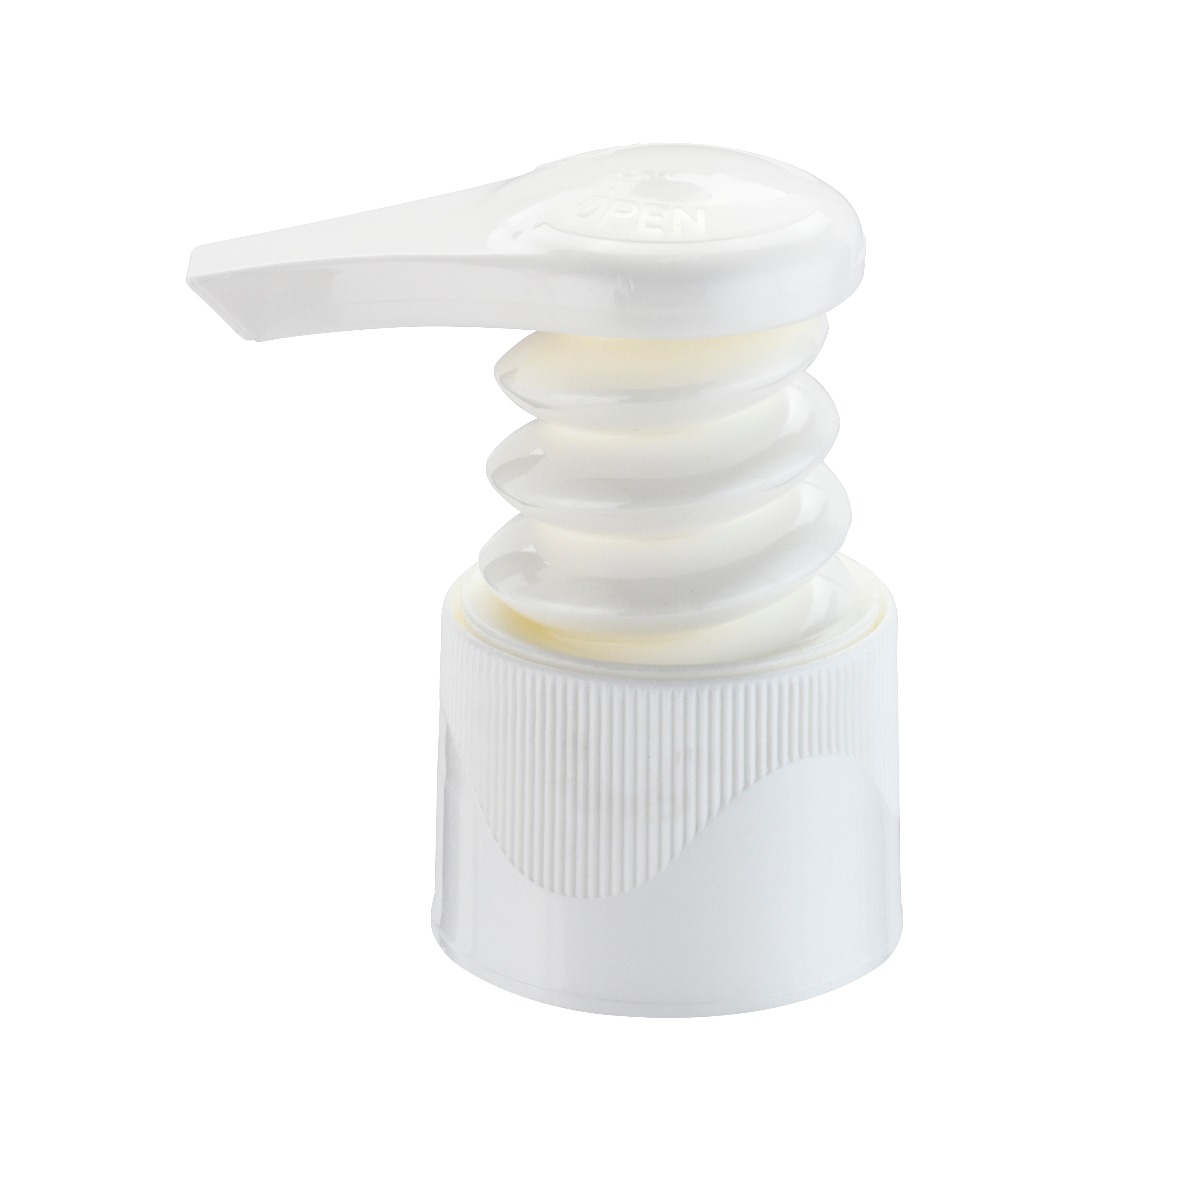 Funnel lid top with press down spray